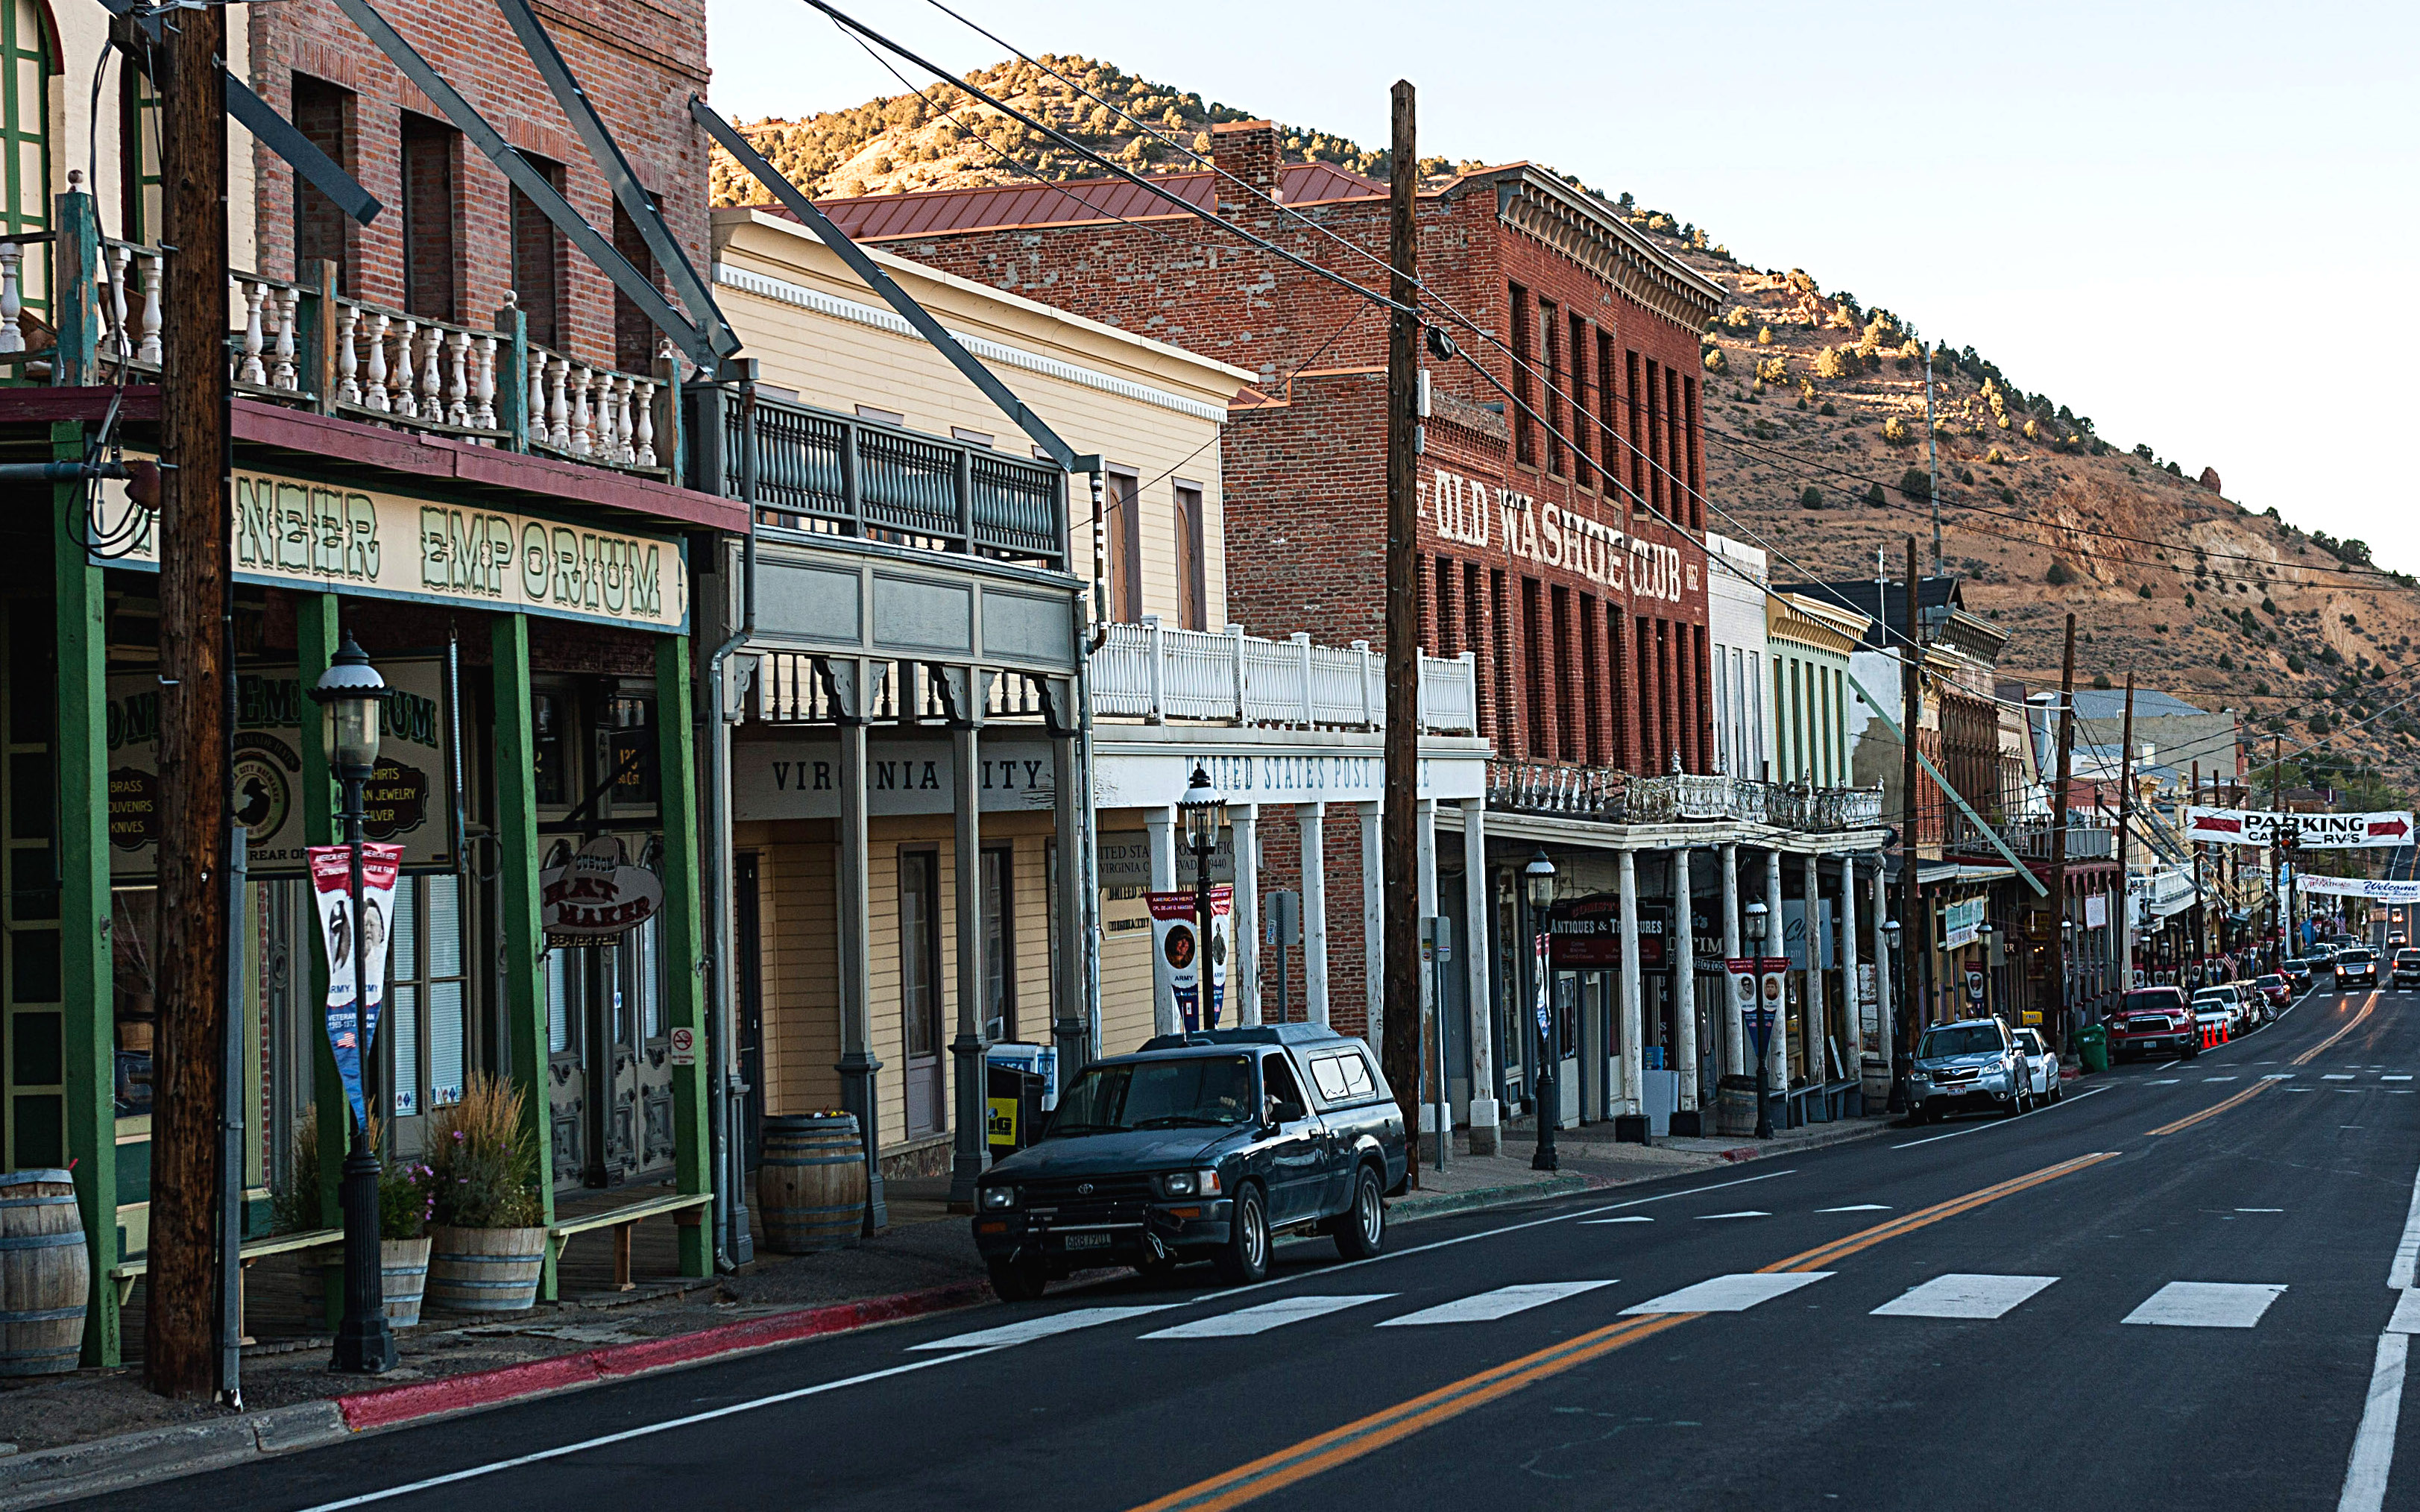 Virginia City's main street is as busy today with visitors as it was with miners in the 1860s - and just as pretty. Image by Alexander Howard / Lonely Planet